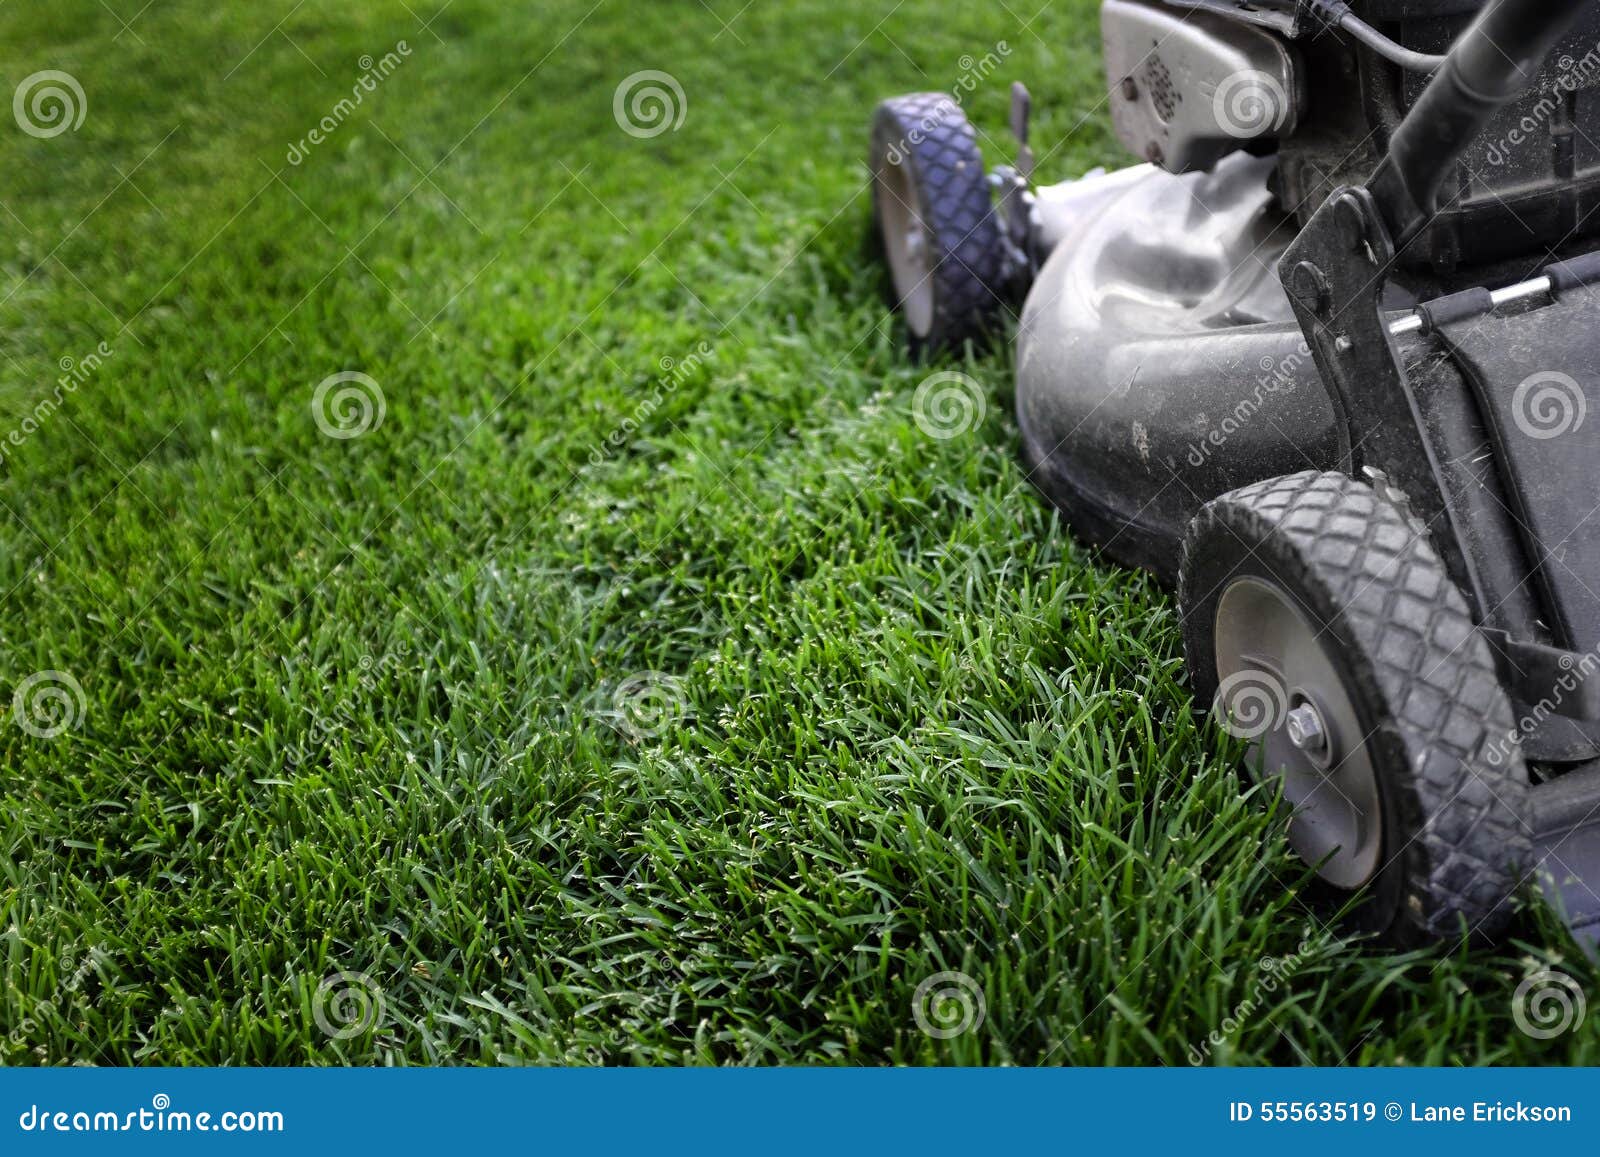 lawn mower on grass preparing to mow